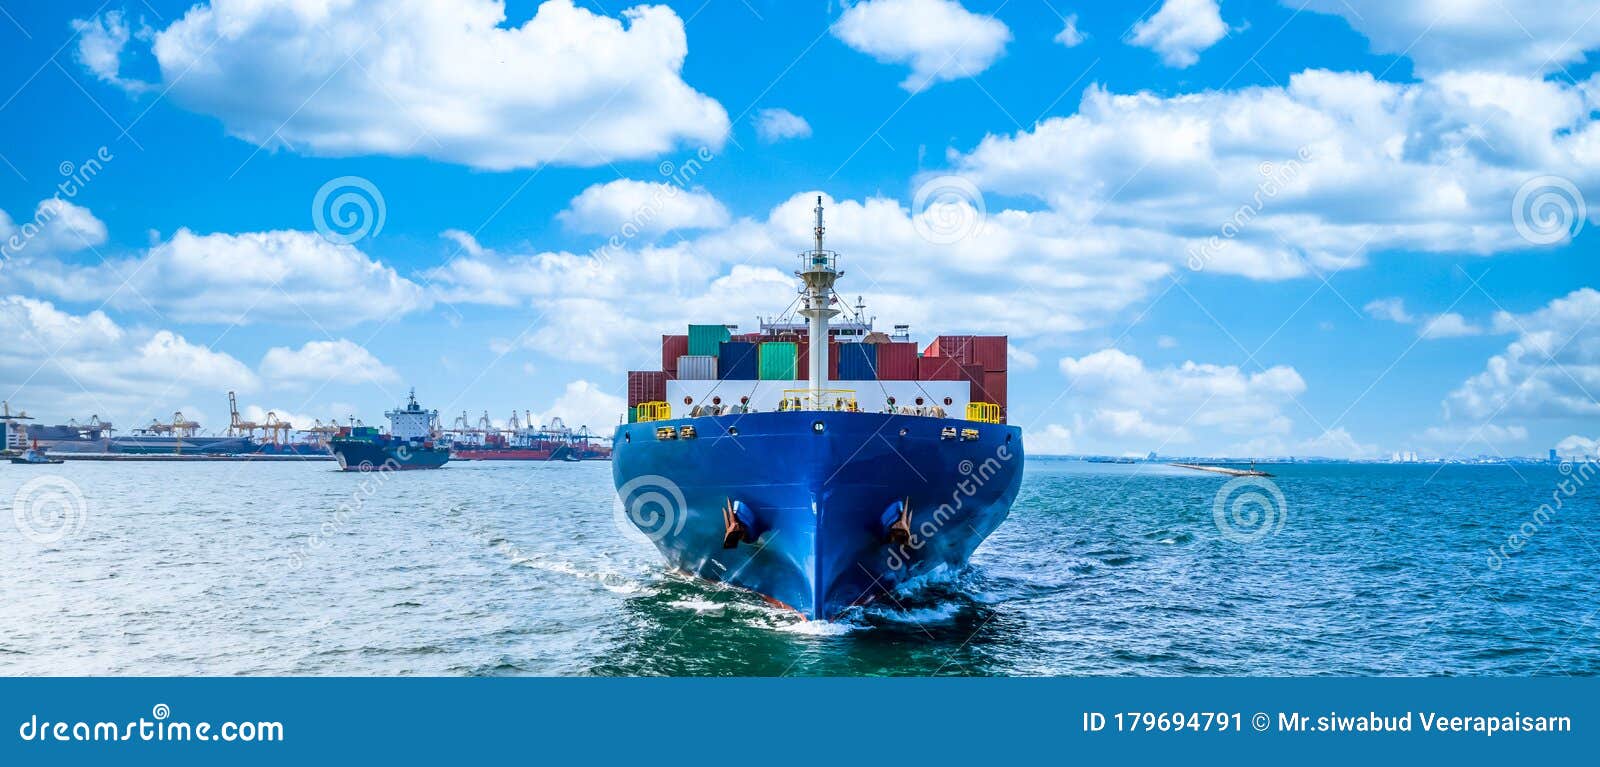 container cargo ship in ocean, business industry commerce global import export logistic transportation oversea worldwide, sea